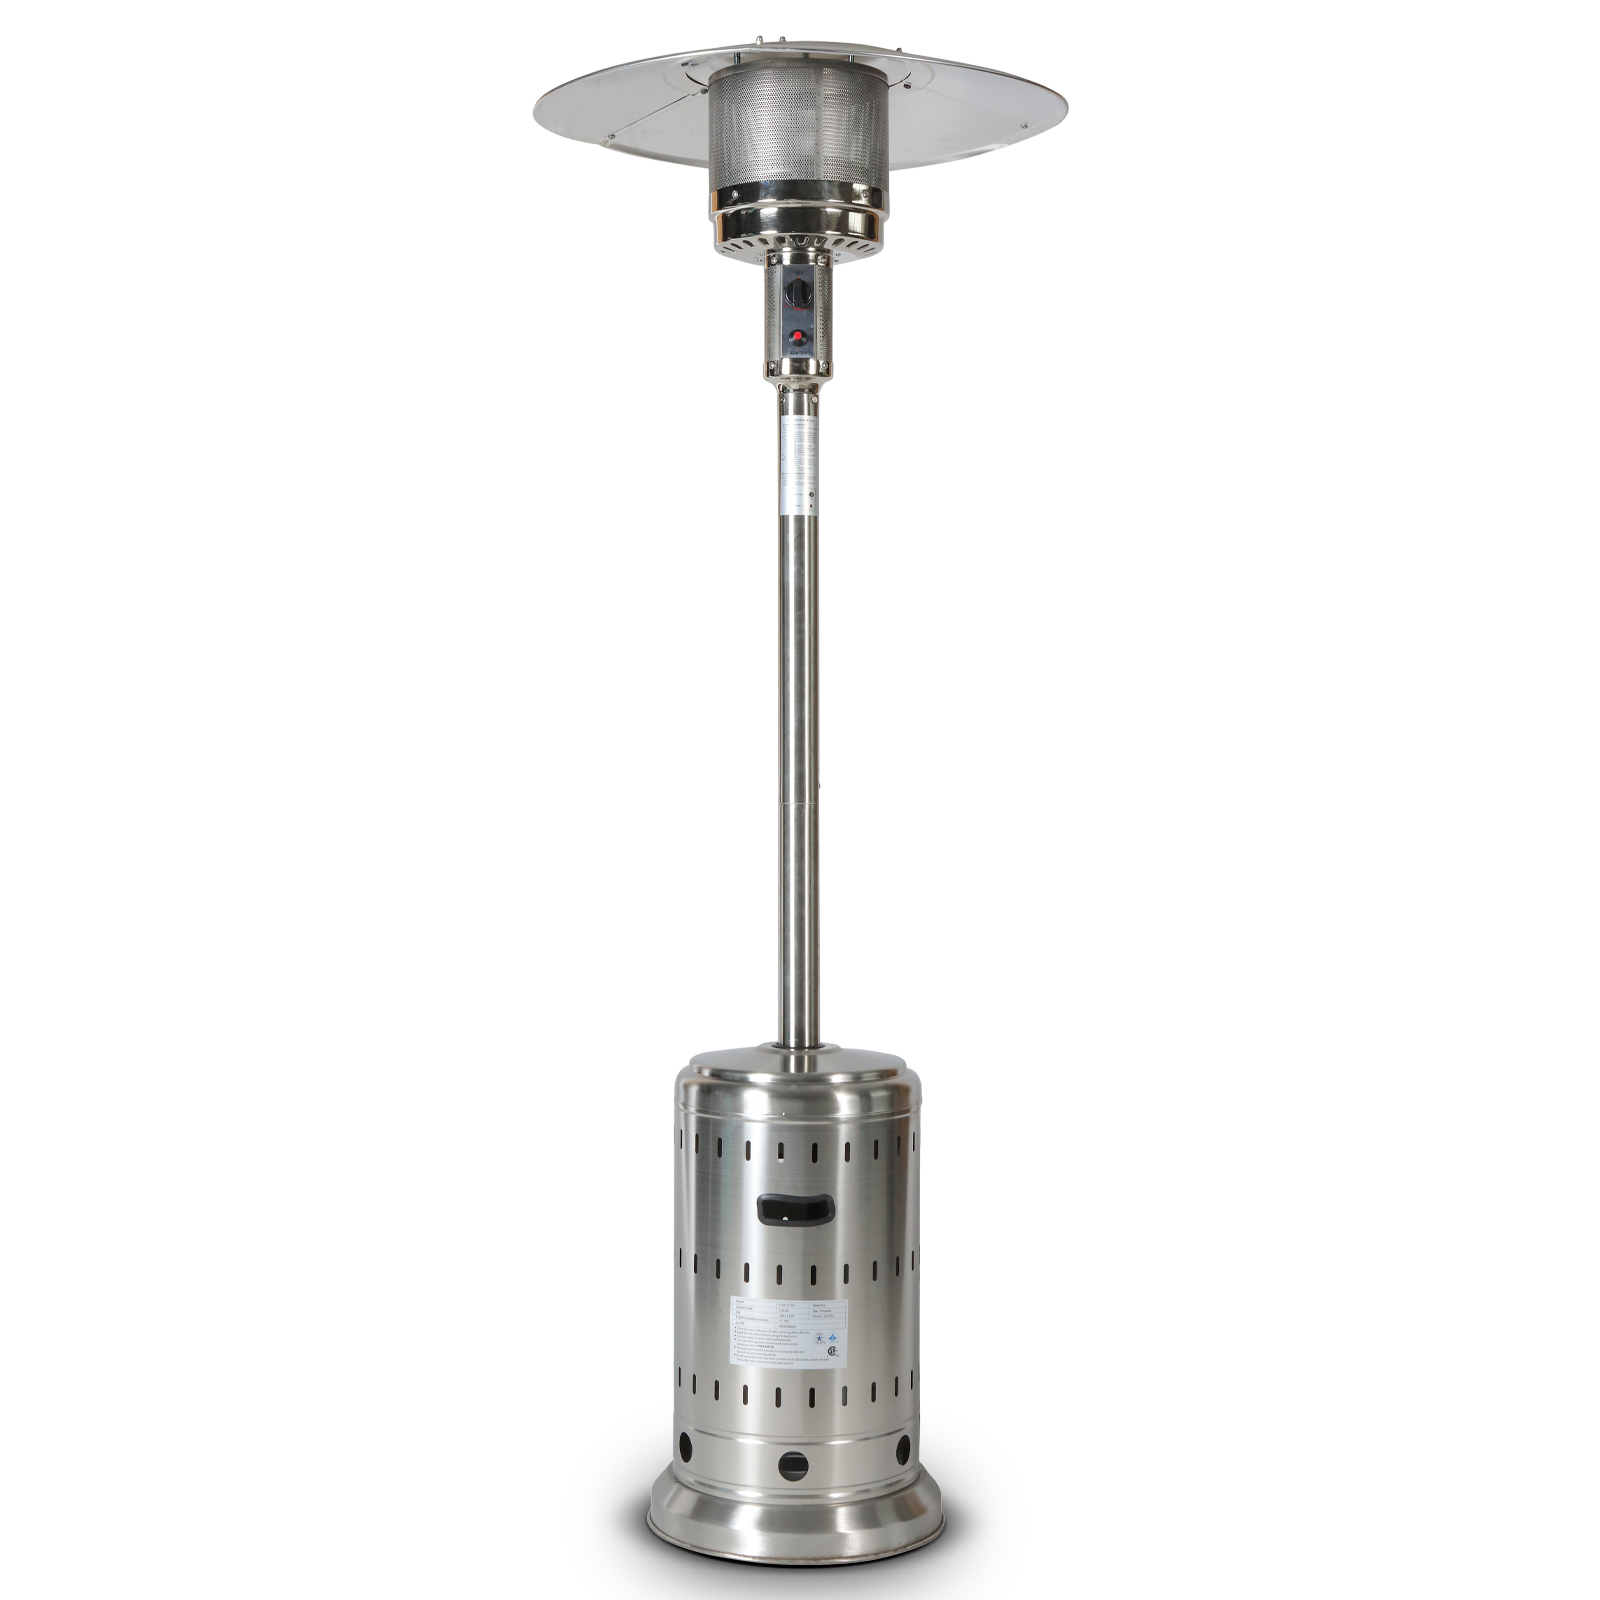 46000BTU Propane Stainless Steel Mushroom Outdoor Patio Heater with Hollow Pattern on Tank housing, with Two Smooth-rolling Wheels,with Hose Set,with Black Cover,Pole in Two Pieces(Upper and Bottom)-CASAINC